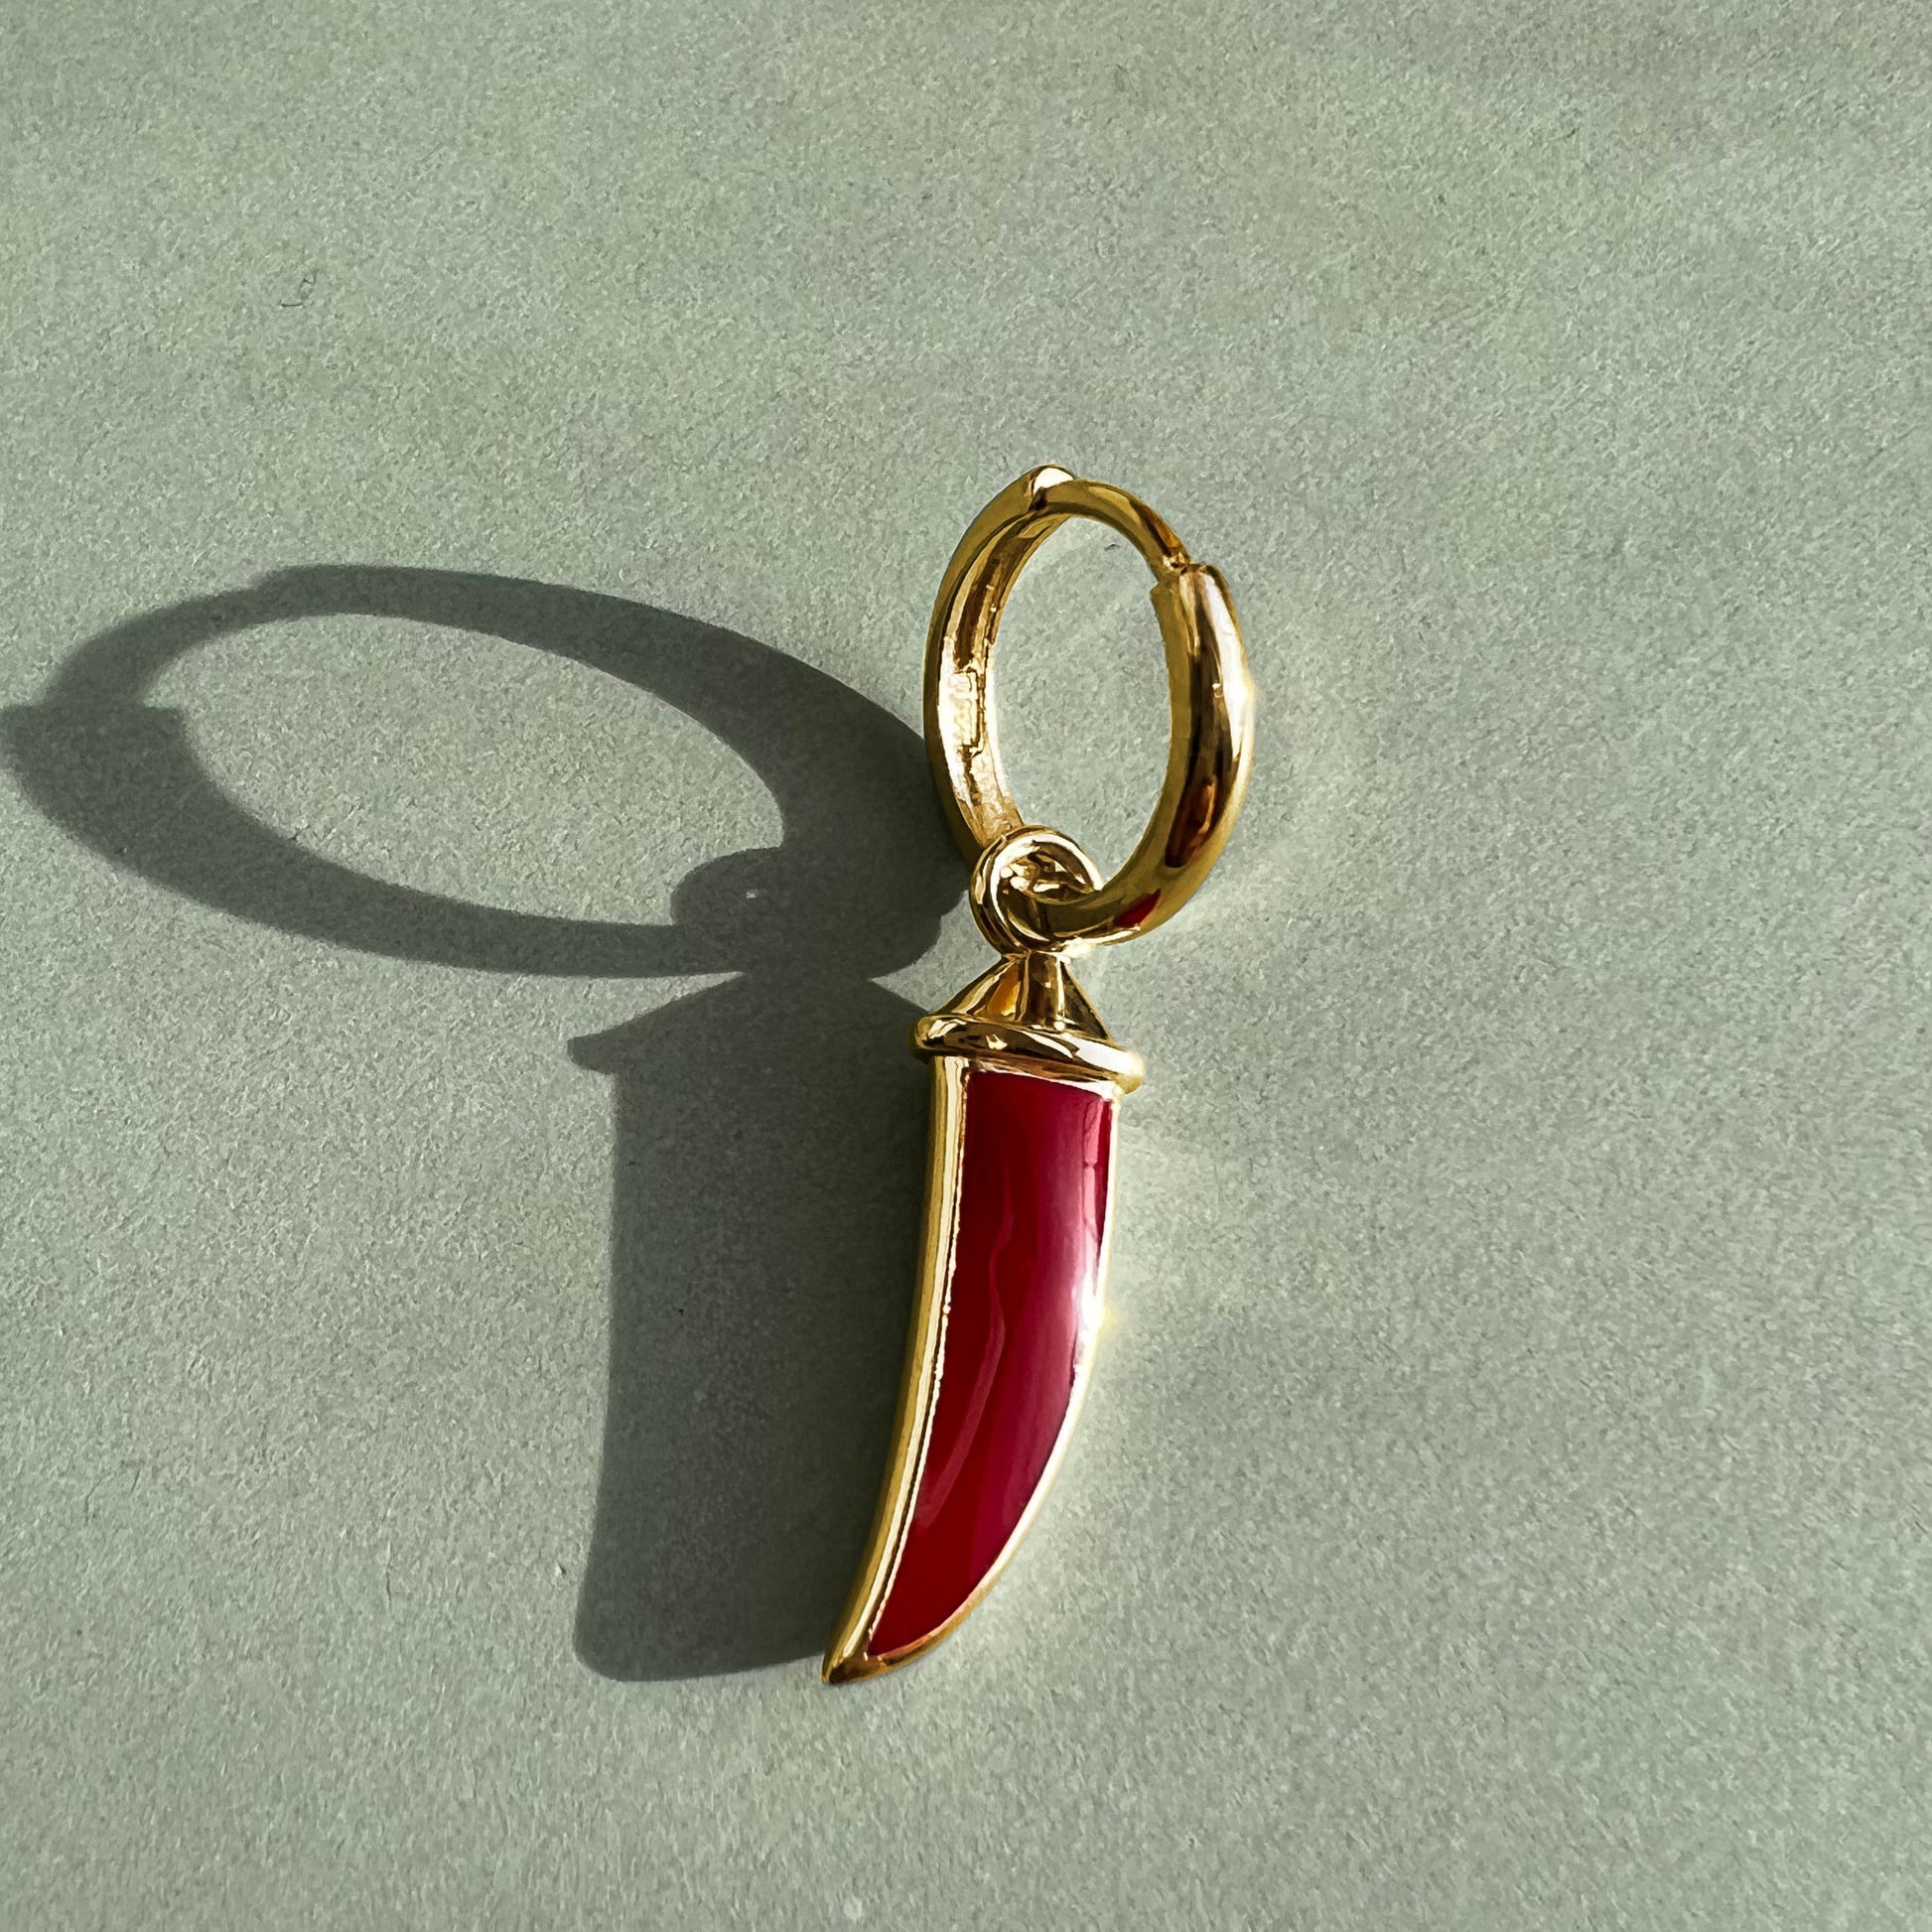 EARRING "HOT CHILI' / SOLID GOLD & COLORED ENAMEL